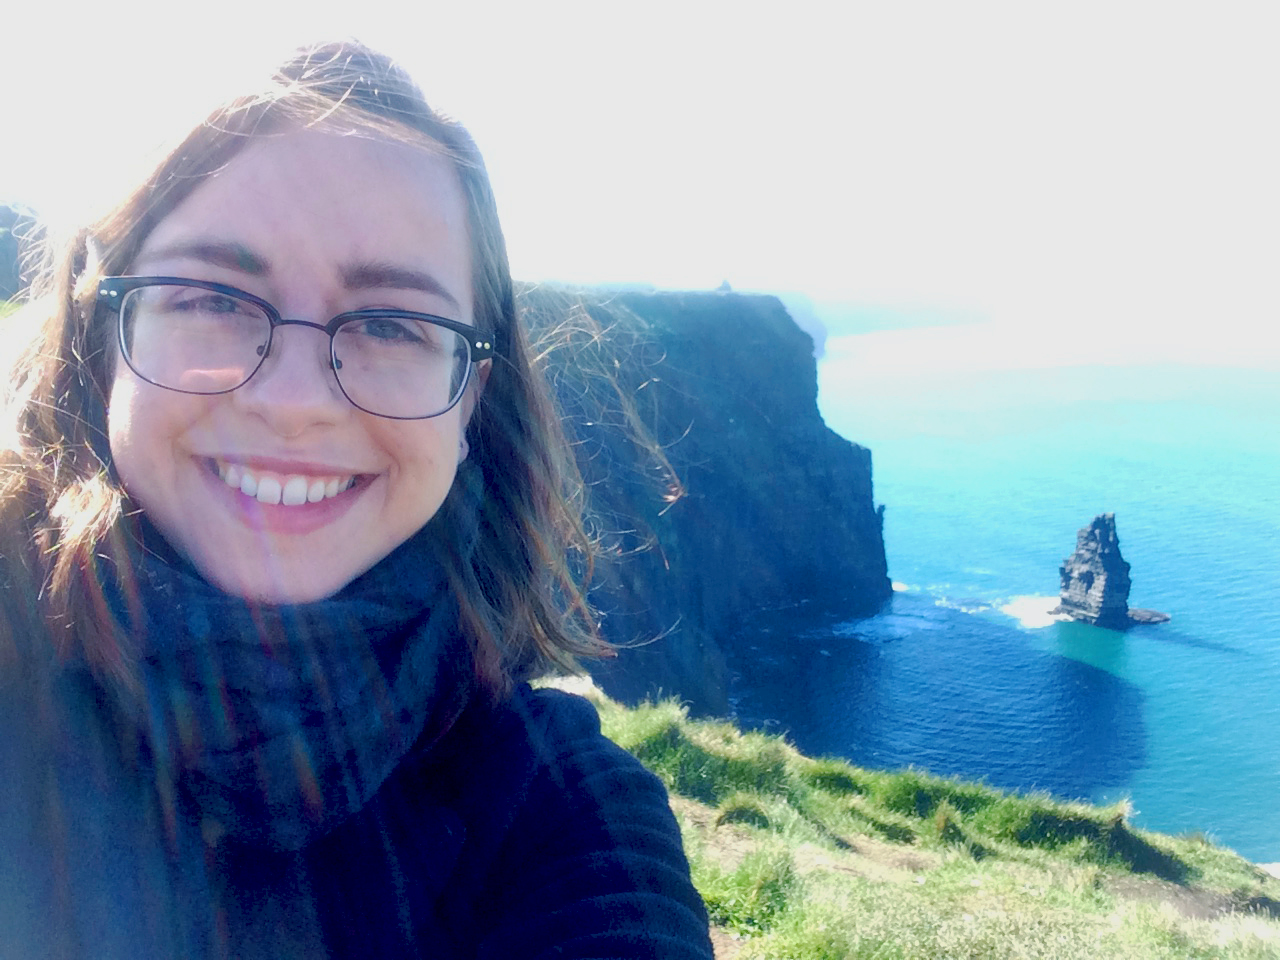 a photo of me at the Cliffs of Moher in County Clare, Ireland